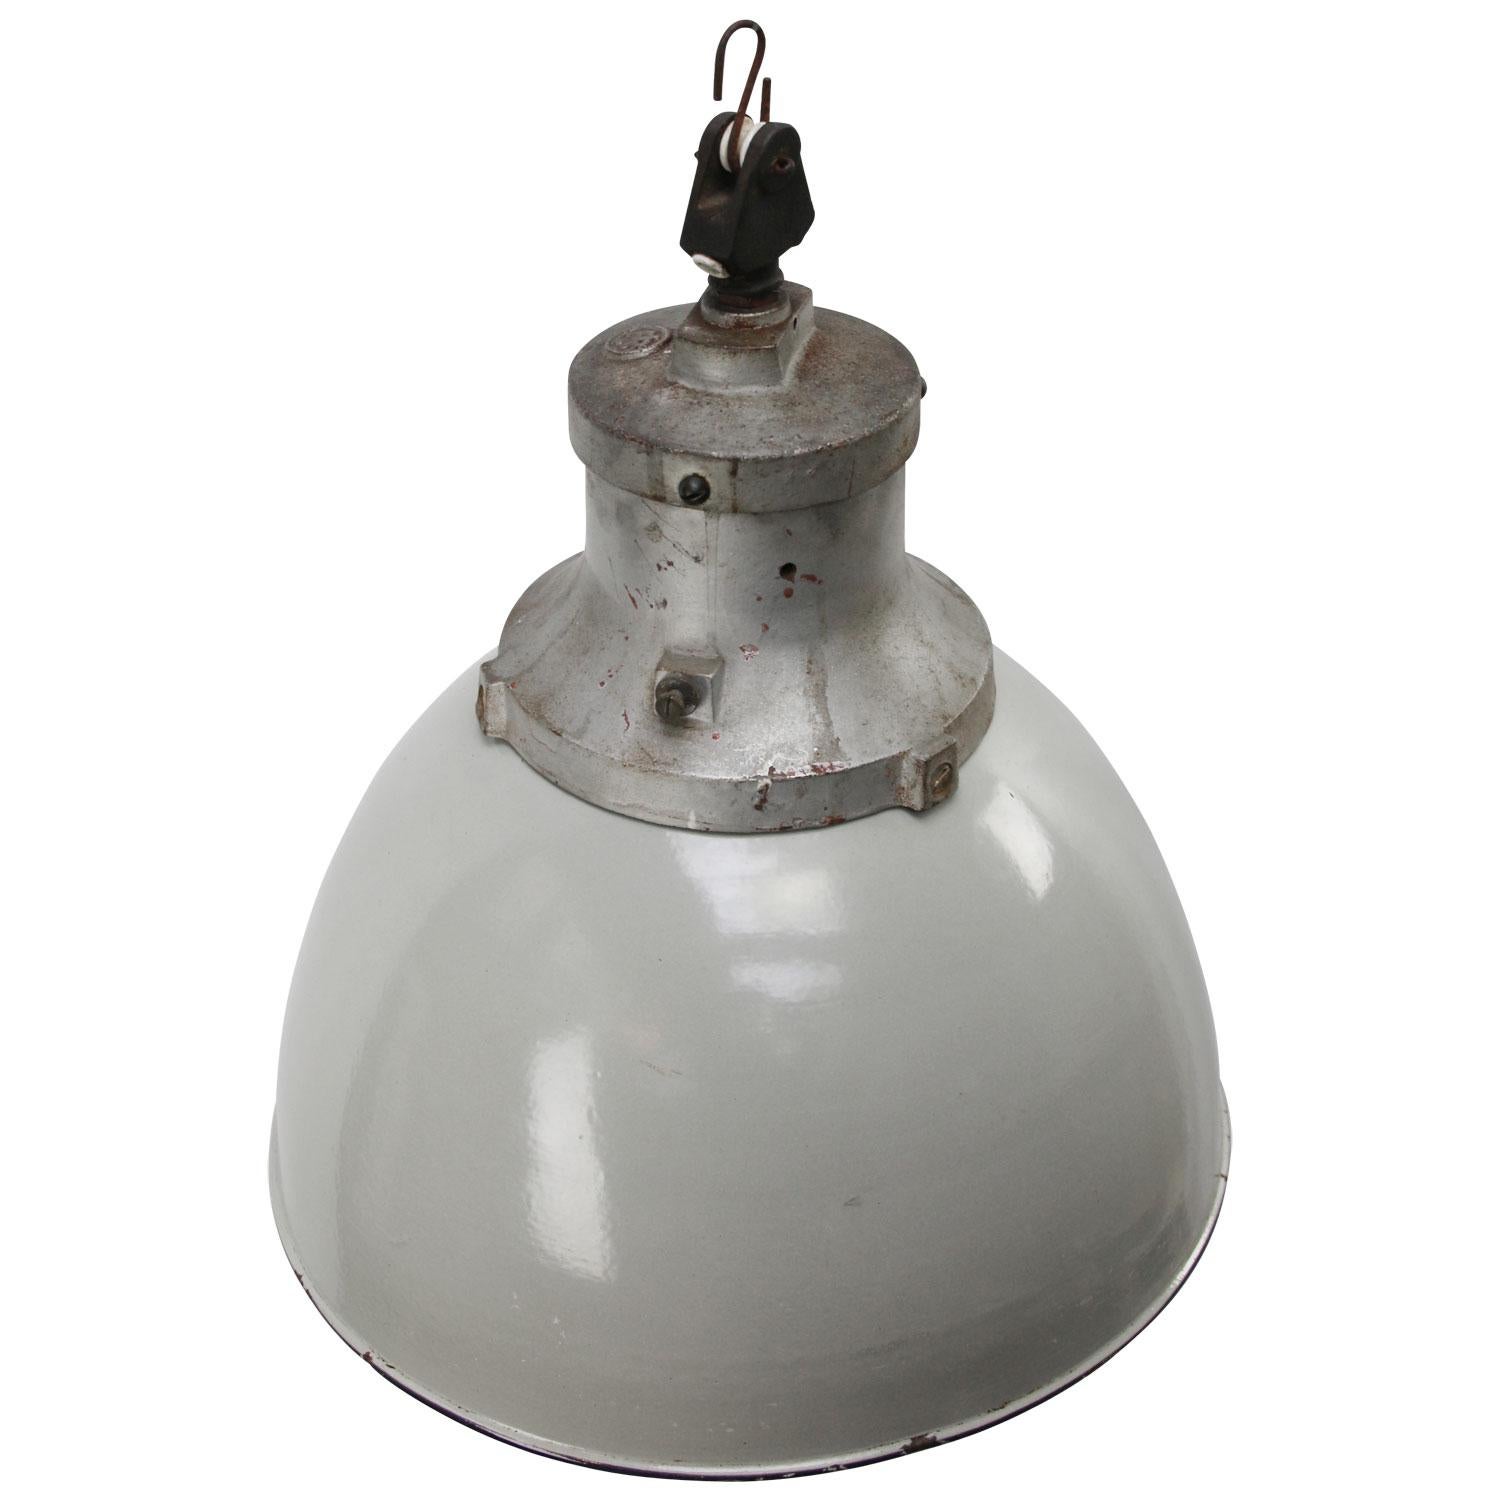 Rare and old factory lamp by Industria Rotterdam
Grey enamel with gray cast iron top
white interior

Weight: 5.40 kg / 11.9 lb

Priced per individual item. All lamps have been made suitable by international standards for incandescent light